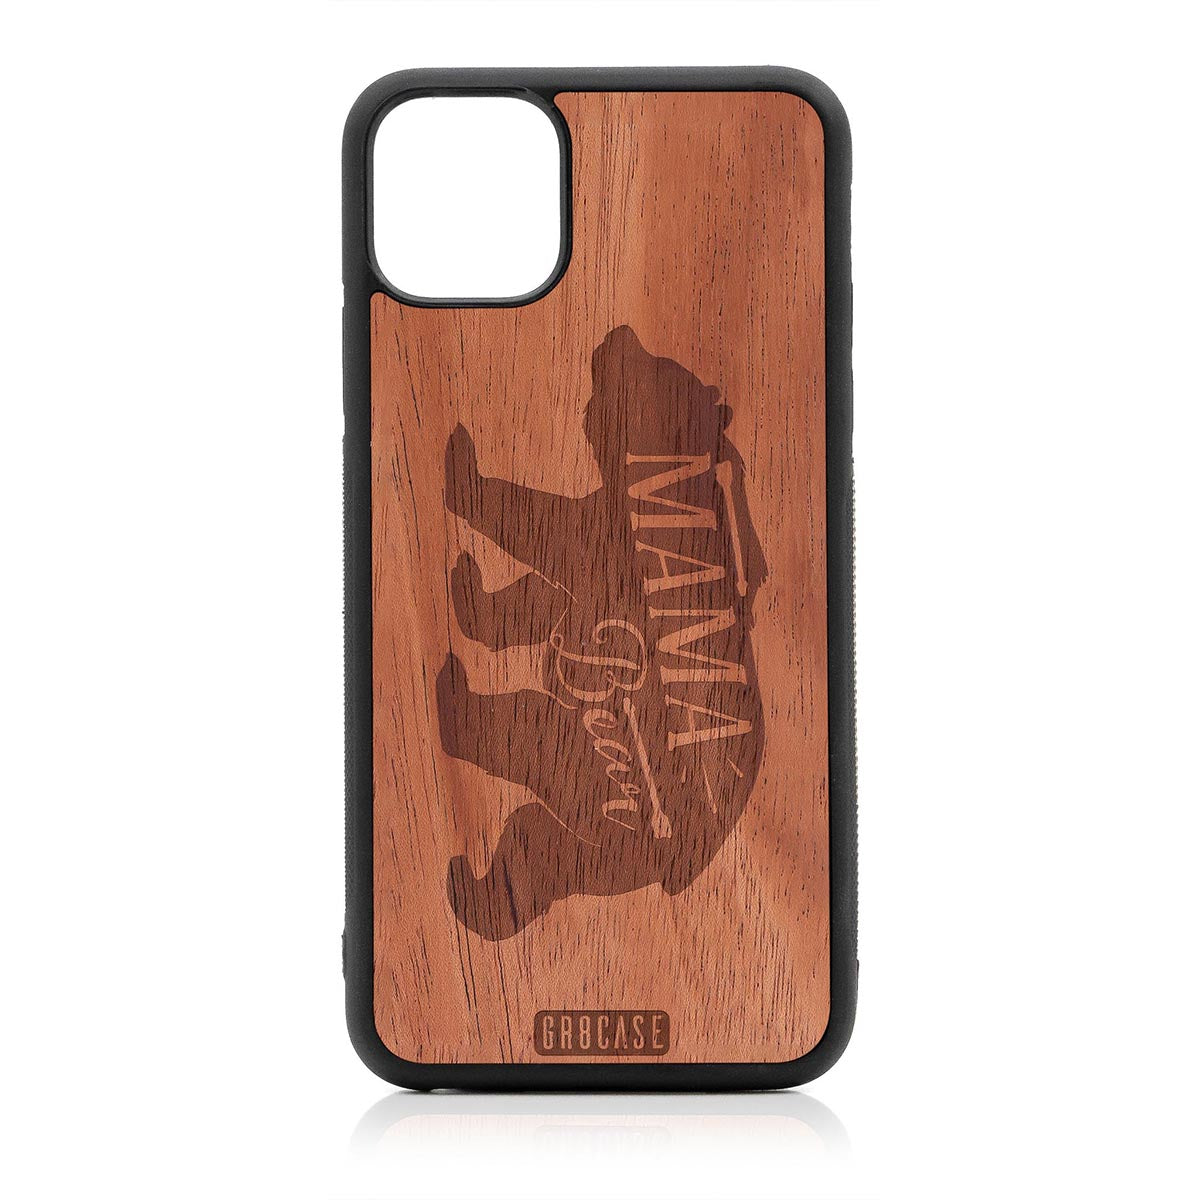 Mama Bear Design Wood Case For iPhone 11 Pro Max by GR8CASE